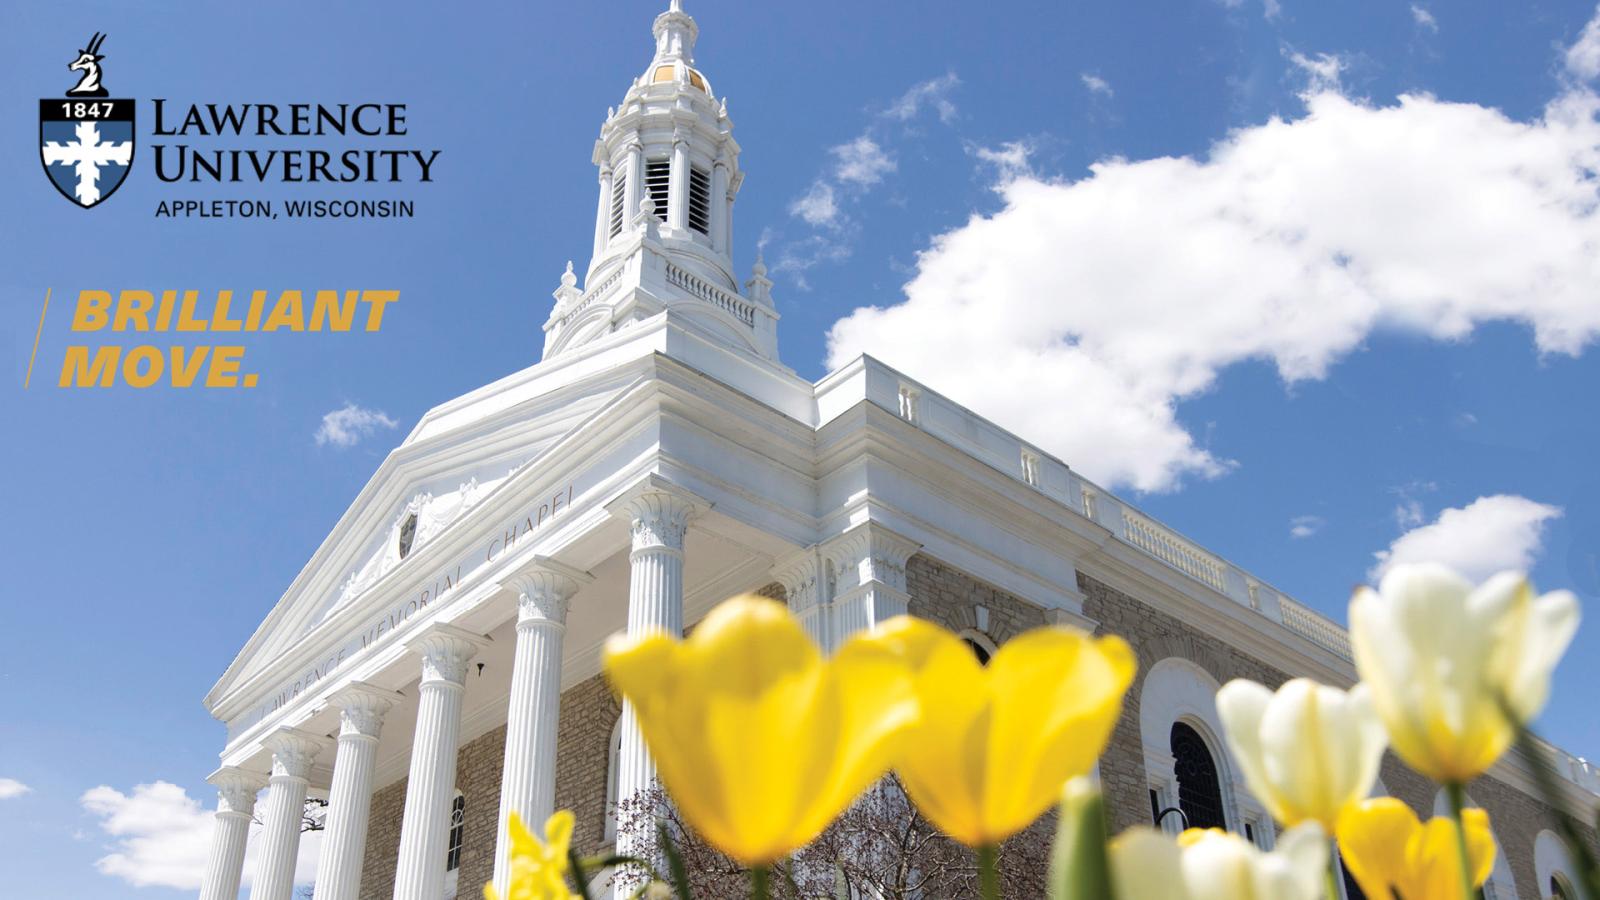 Zoom Background - Lawrence Logo top left, Memorial Chapel with yellow tulips in the foreground